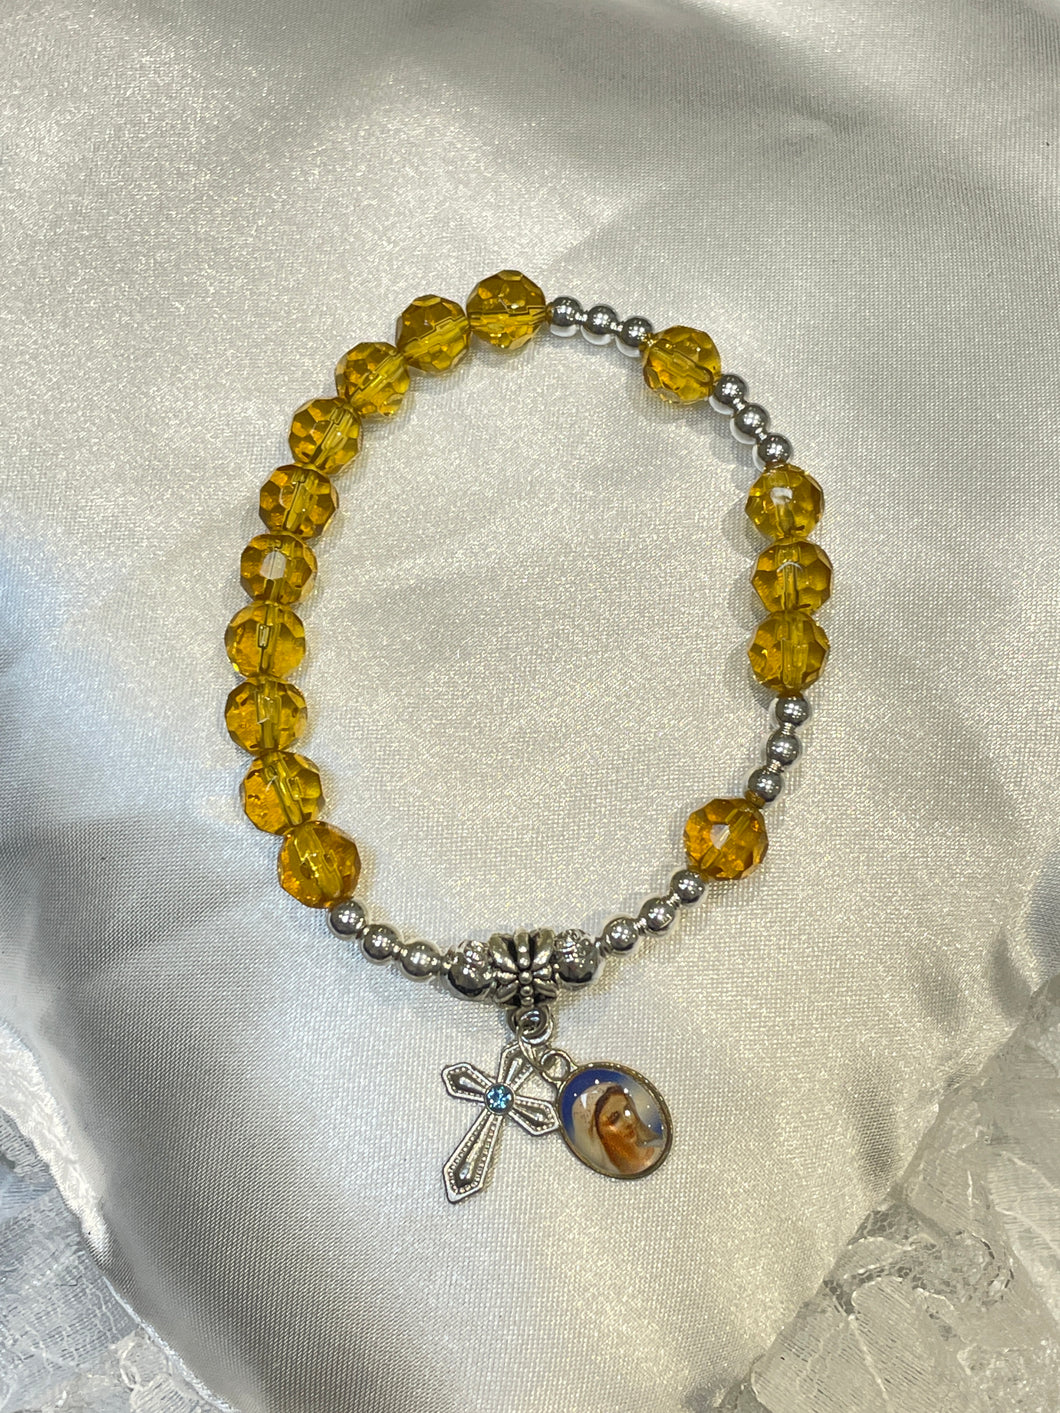 Amber Crystal Rosary Bracelet with Our Lady Image and Cross Charms